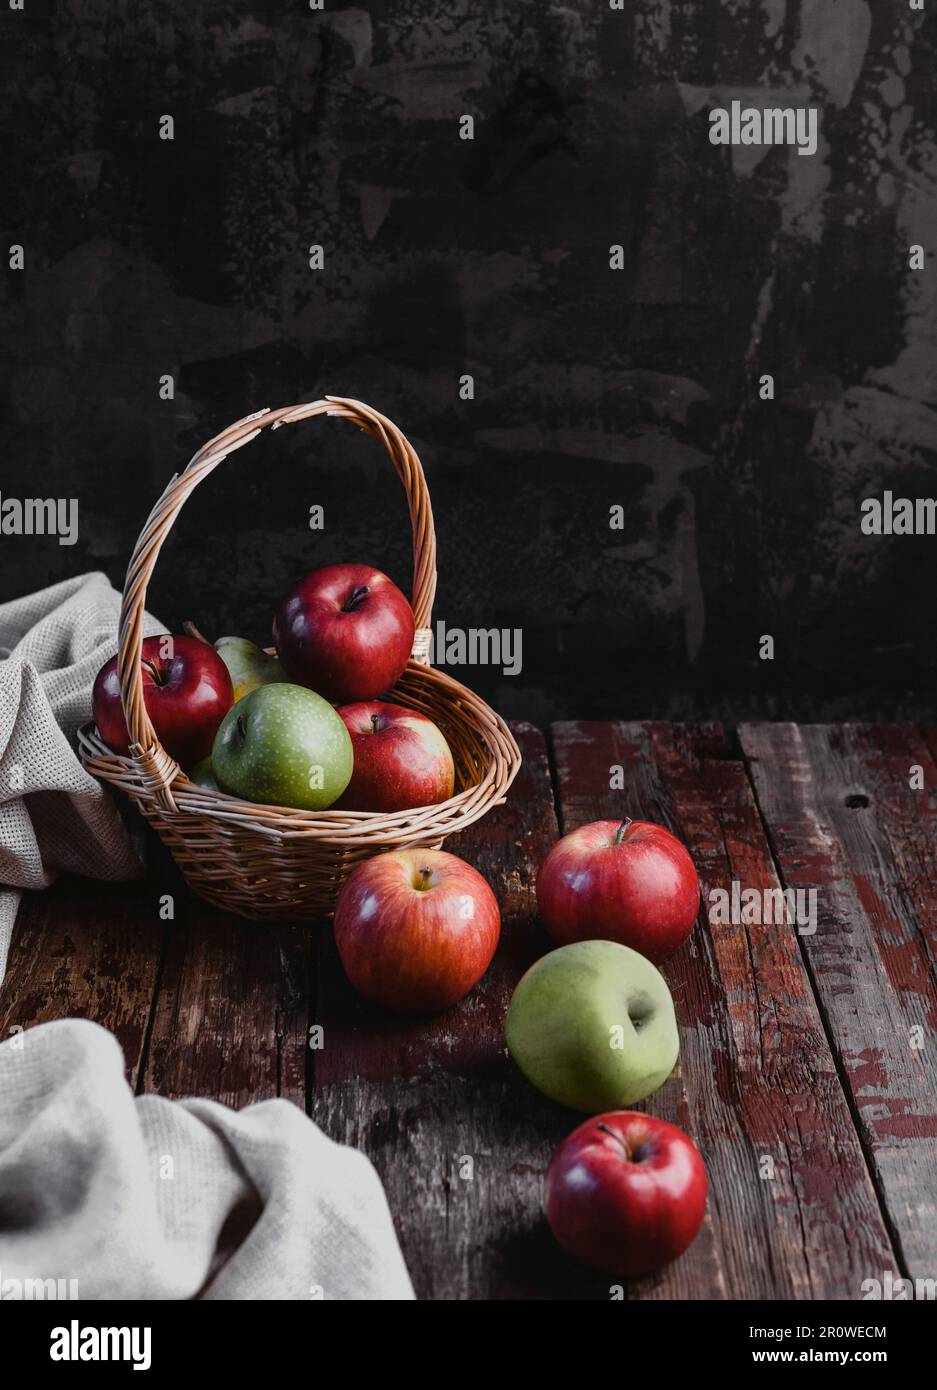 basket and apples Stock Photo